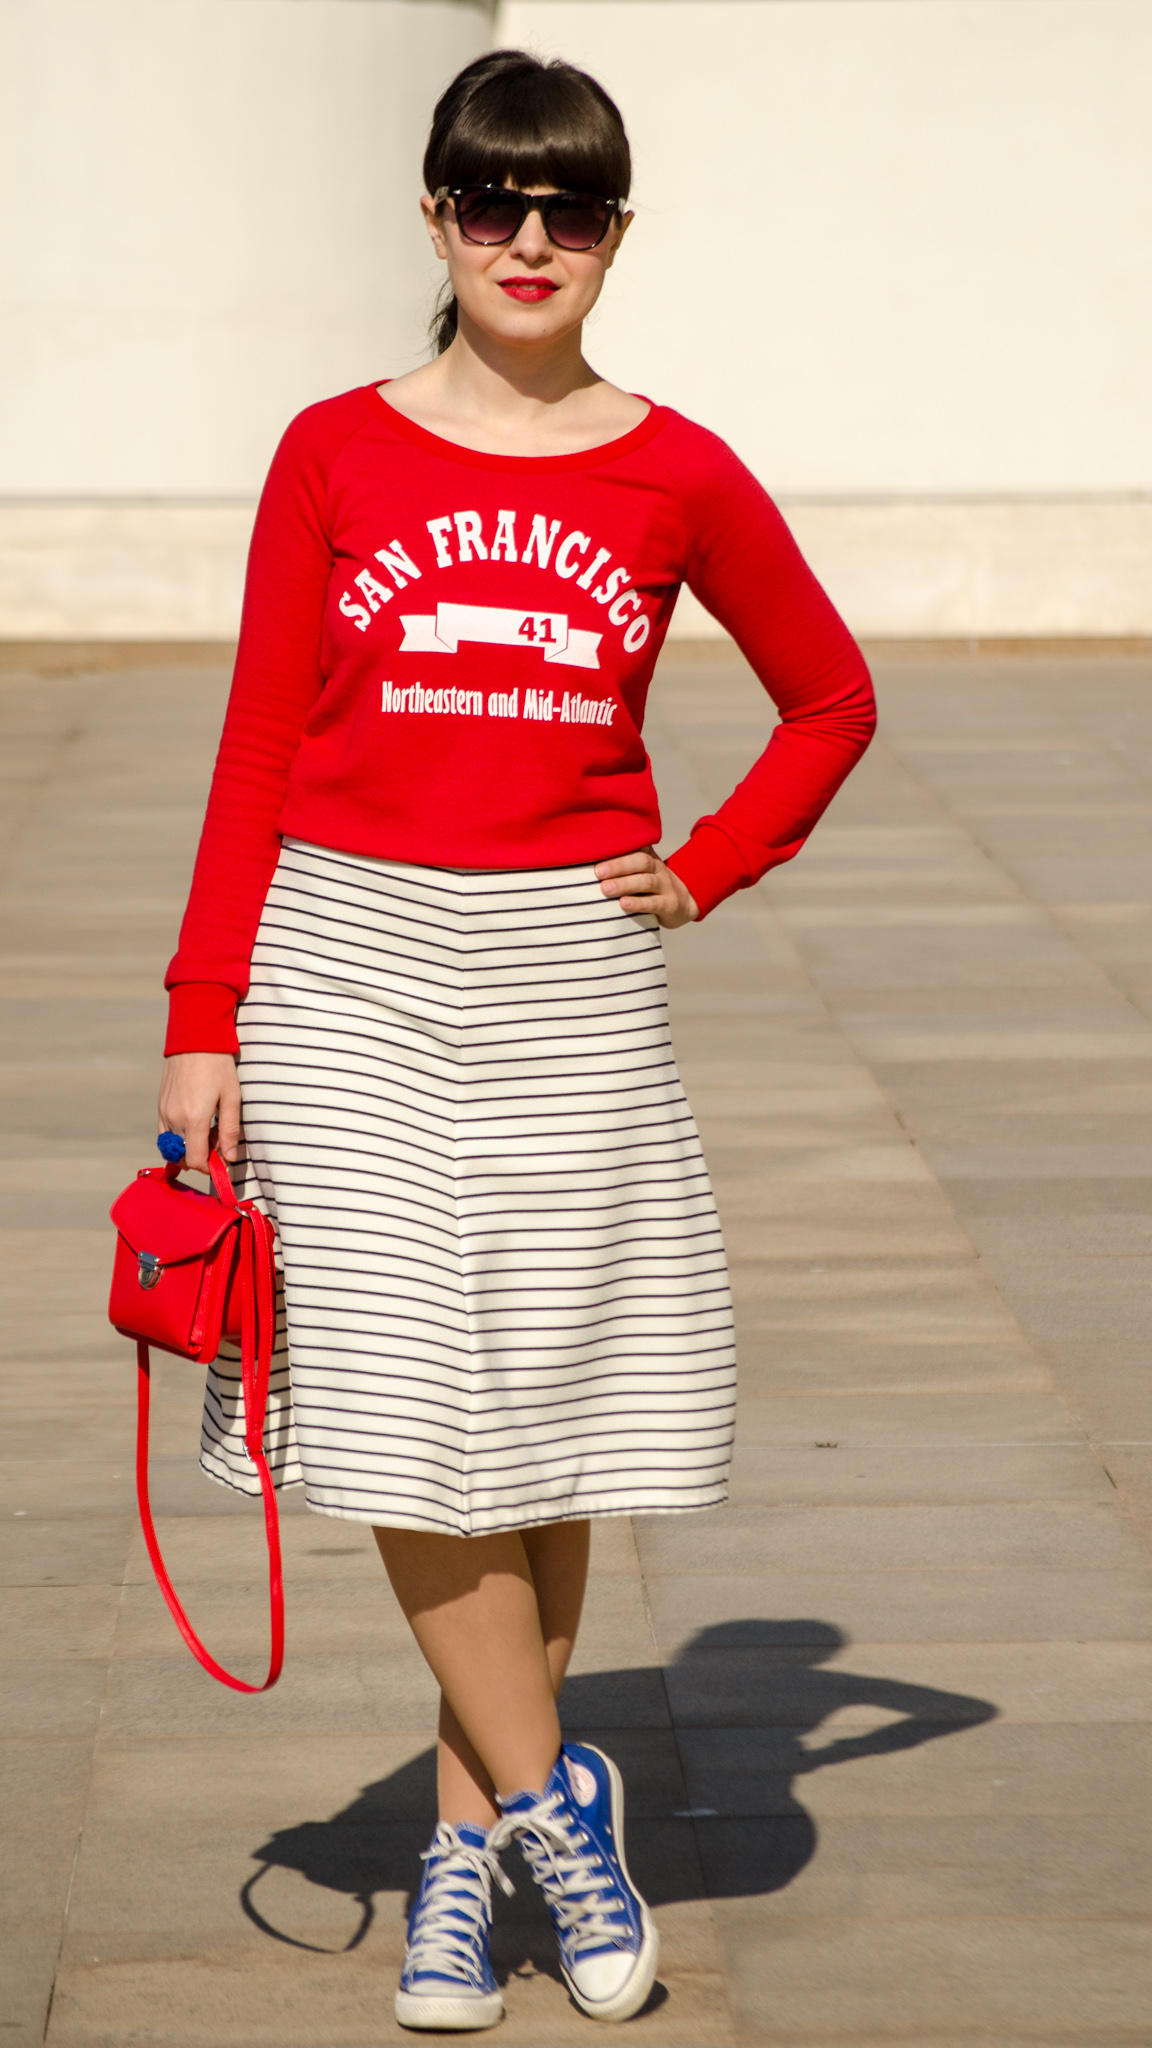 sport red top koton zara striped skirt stripes navy look red bag satchel cobalt blue sneakers converse spring outfit